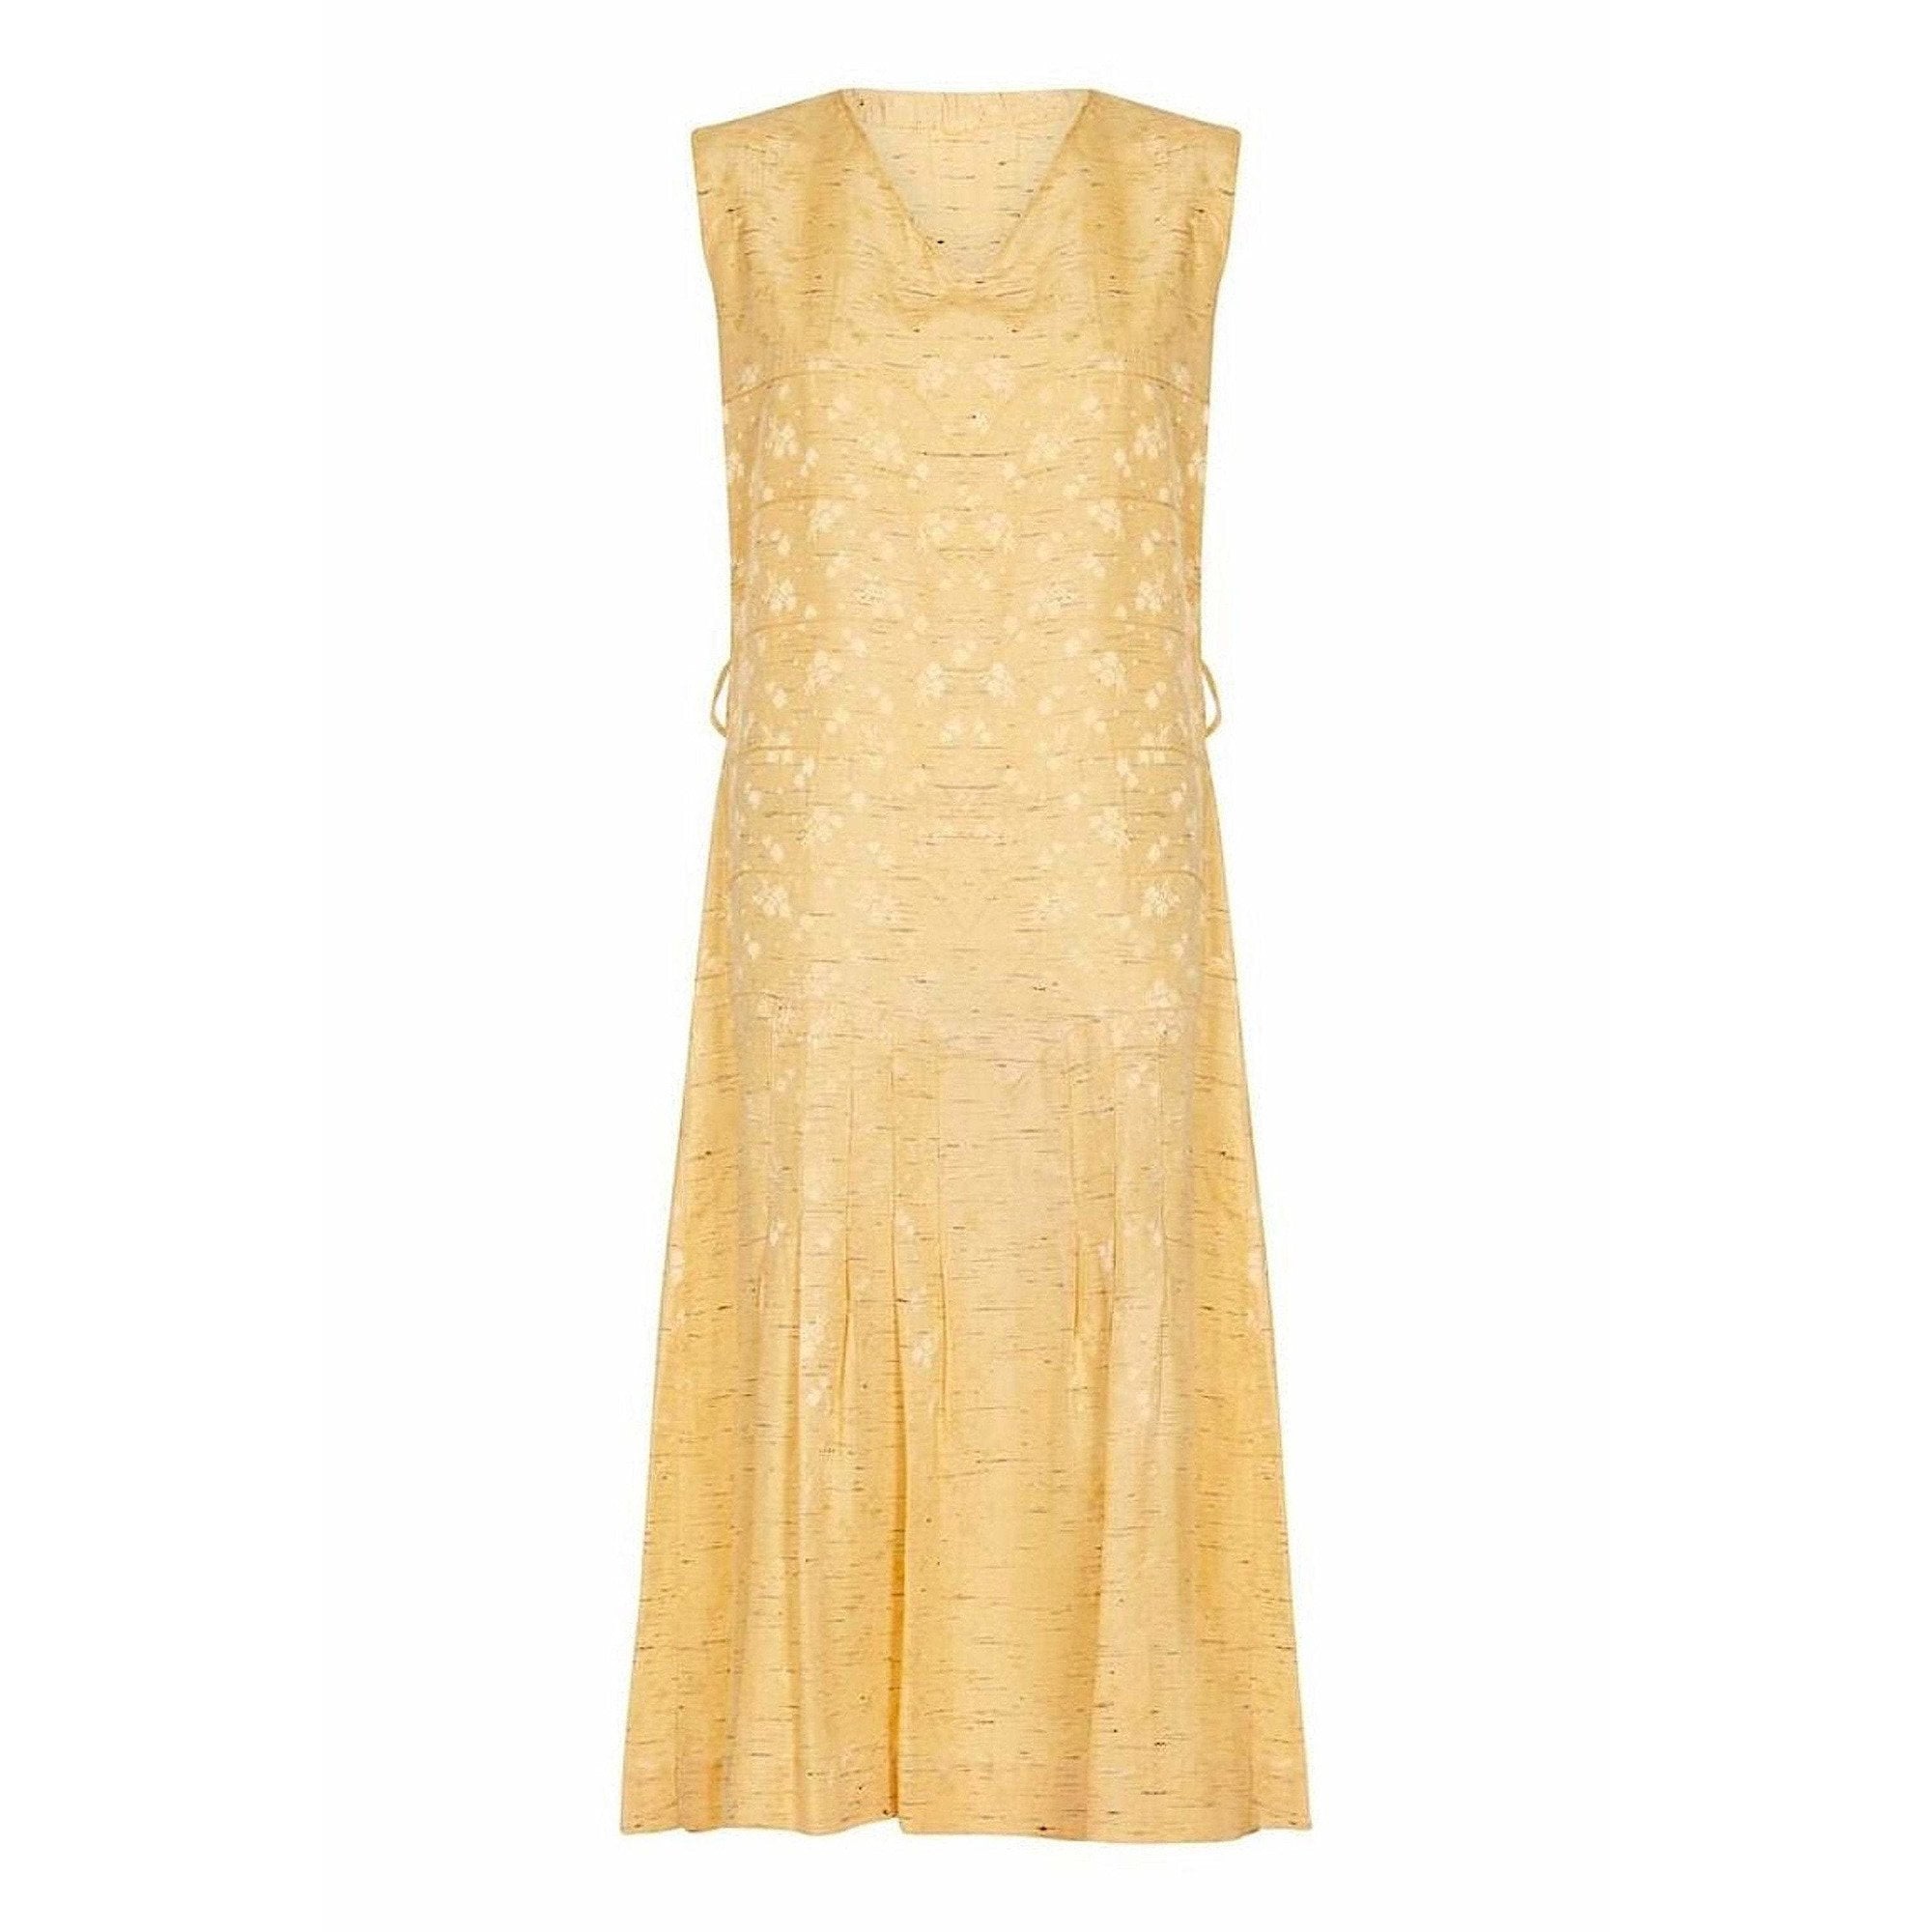 ARCHIVE - 1920s Yellow Silk Flapper Dress With Matching Jacket